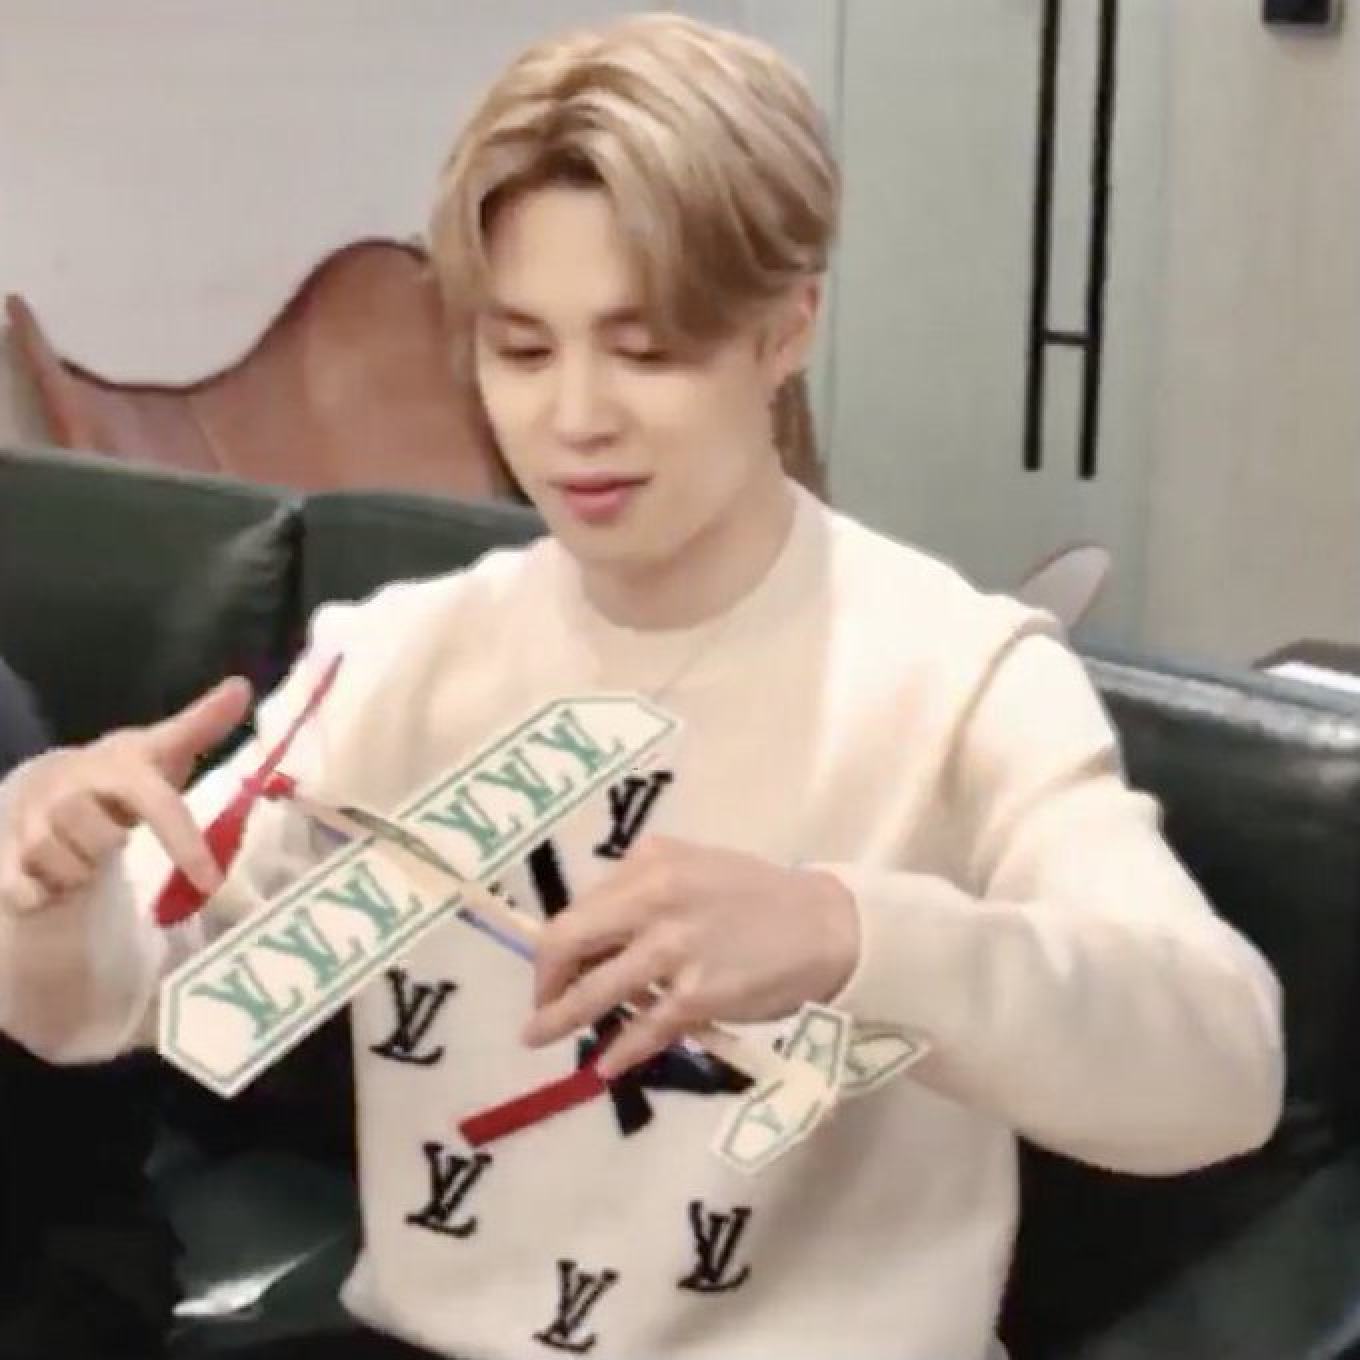 BTS's Jimin sells out the Louis Vuitton pullover he wore in an